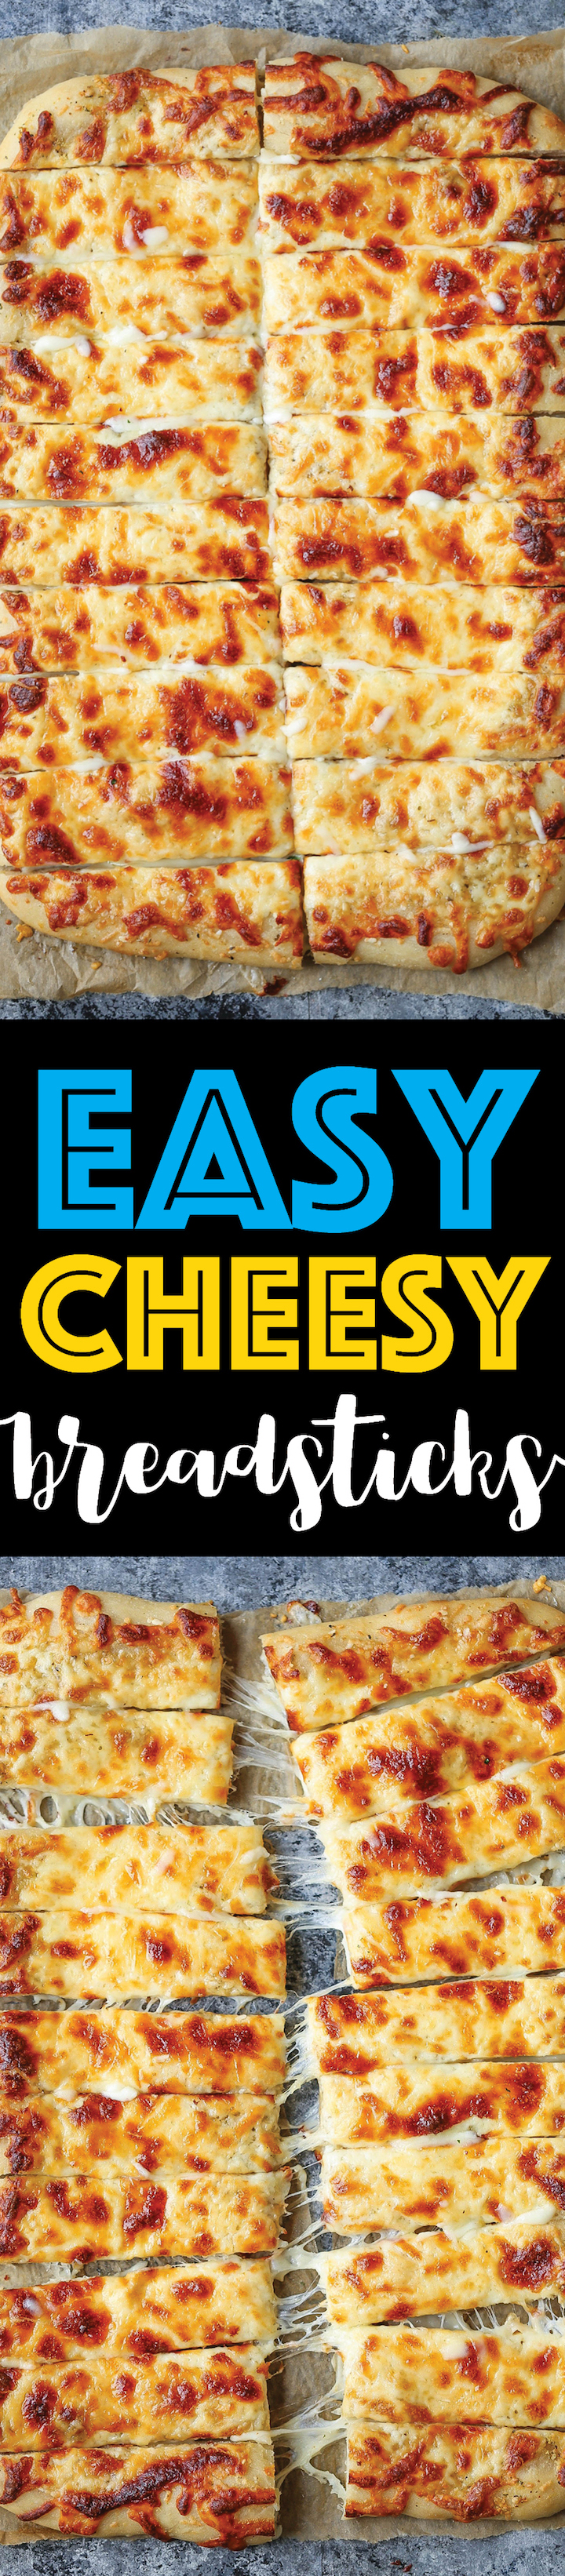 Easy Cheesy Breadsticks - The easiest, cheesiest breadsticks ever made <30 min from start to finish! Great as an appetizer or even for pizza night!